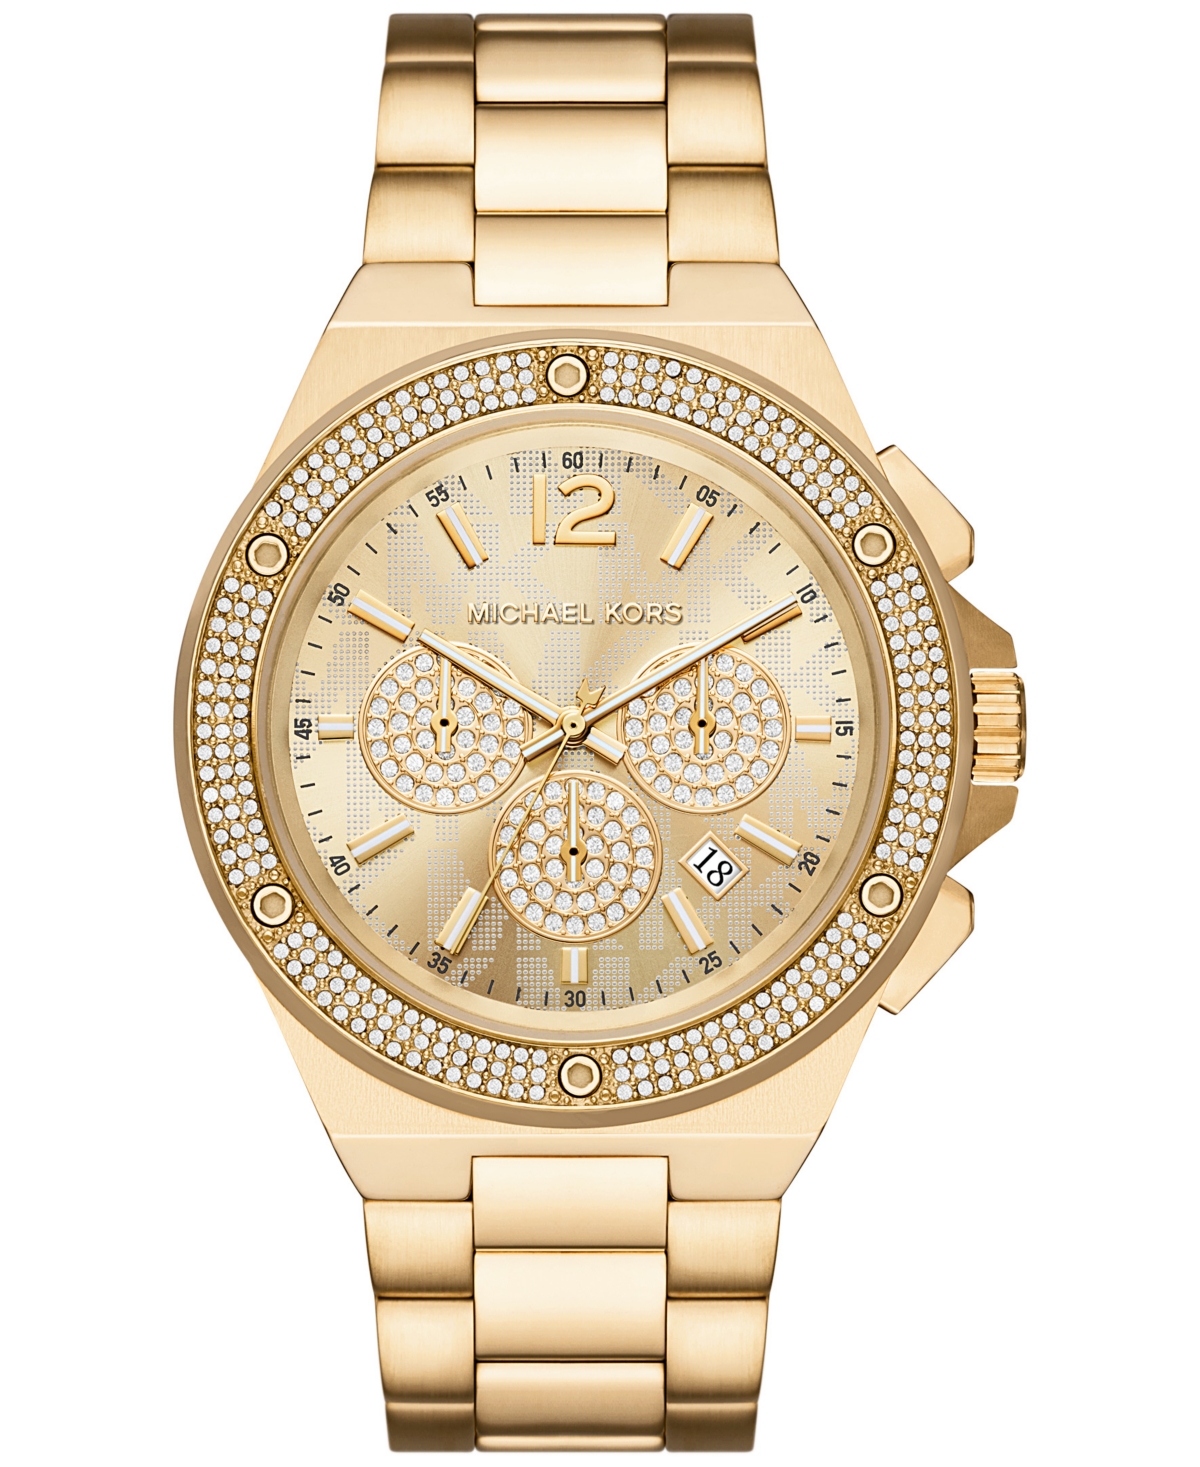 Michael Kors Men's Lennox Chronograph Gold-Tone Stainless Steel Bracelet  Watch 45mm & Reviews - All Watches - Jewelry & Watches - Macy's